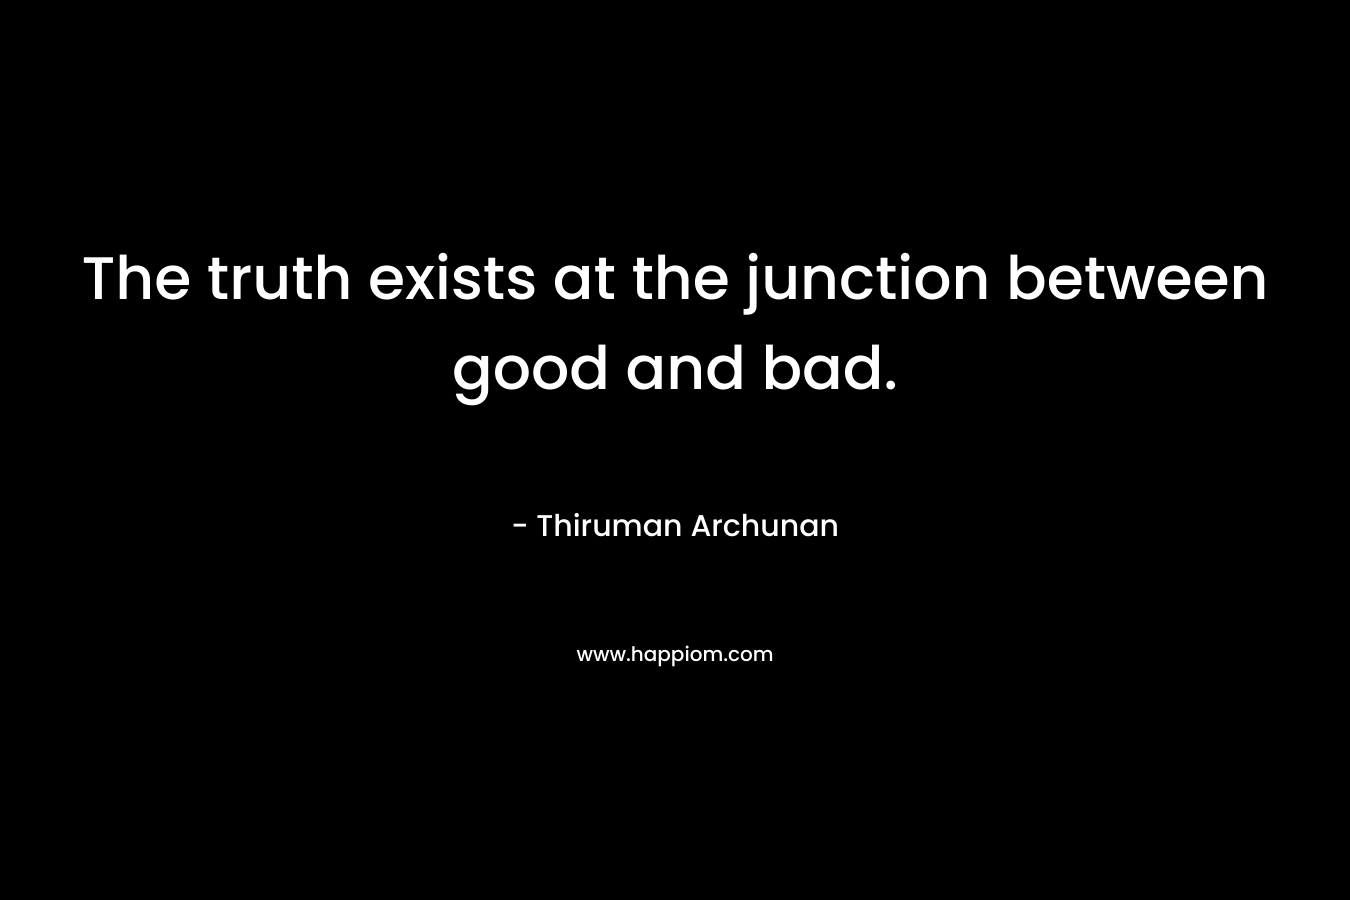 The truth exists at the junction between good and bad. – Thiruman Archunan